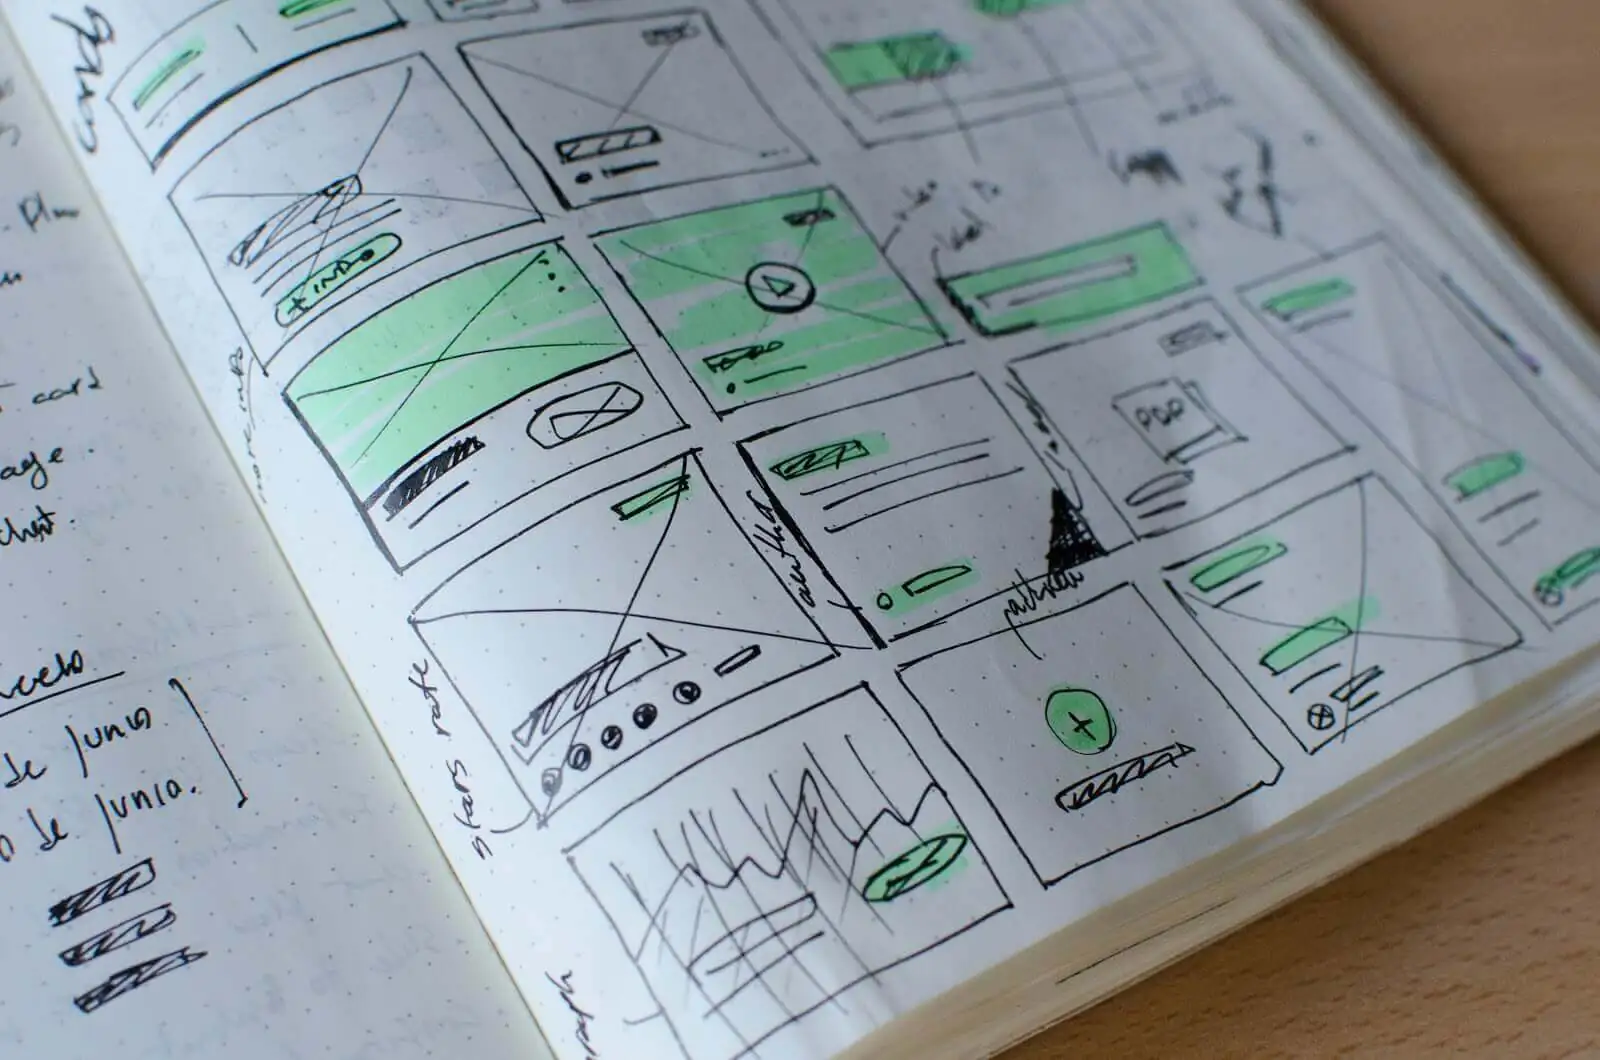 A notebook with a green sketch on it.